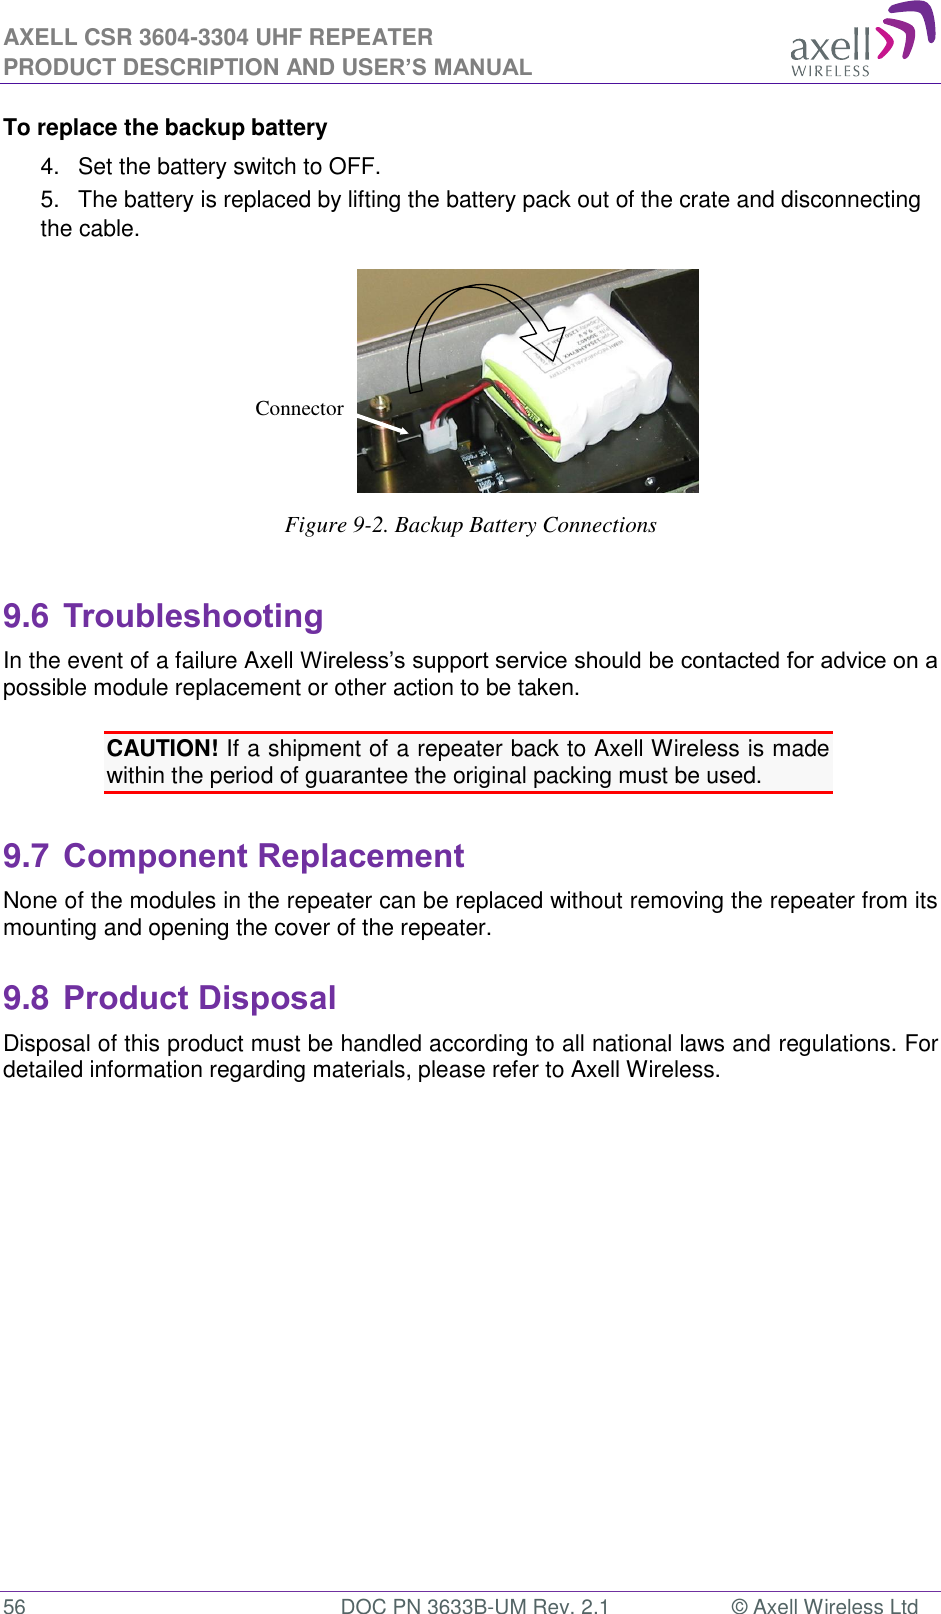 AXELL CSR 3604-3304 UHF REPEATER PRODUCT DESCRIPTION AND USER’S MANUAL  56  DOC PN 3633B-UM Rev. 2.1  © Axell Wireless Ltd  To replace the backup battery 4.  Set the battery switch to OFF. 5.  The battery is replaced by lifting the battery pack out of the crate and disconnecting the cable.  Figure 9-2. Backup Battery Connections  9.6 Troubleshooting In the event of a failure Axell Wireless’s support service should be contacted for advice on a possible module replacement or other action to be taken.  CAUTION! If a shipment of a repeater back to Axell Wireless is made within the period of guarantee the original packing must be used.  9.7 Component Replacement None of the modules in the repeater can be replaced without removing the repeater from its mounting and opening the cover of the repeater.   9.8 Product Disposal Disposal of this product must be handled according to all national laws and regulations. For detailed information regarding materials, please refer to Axell Wireless.      Connector